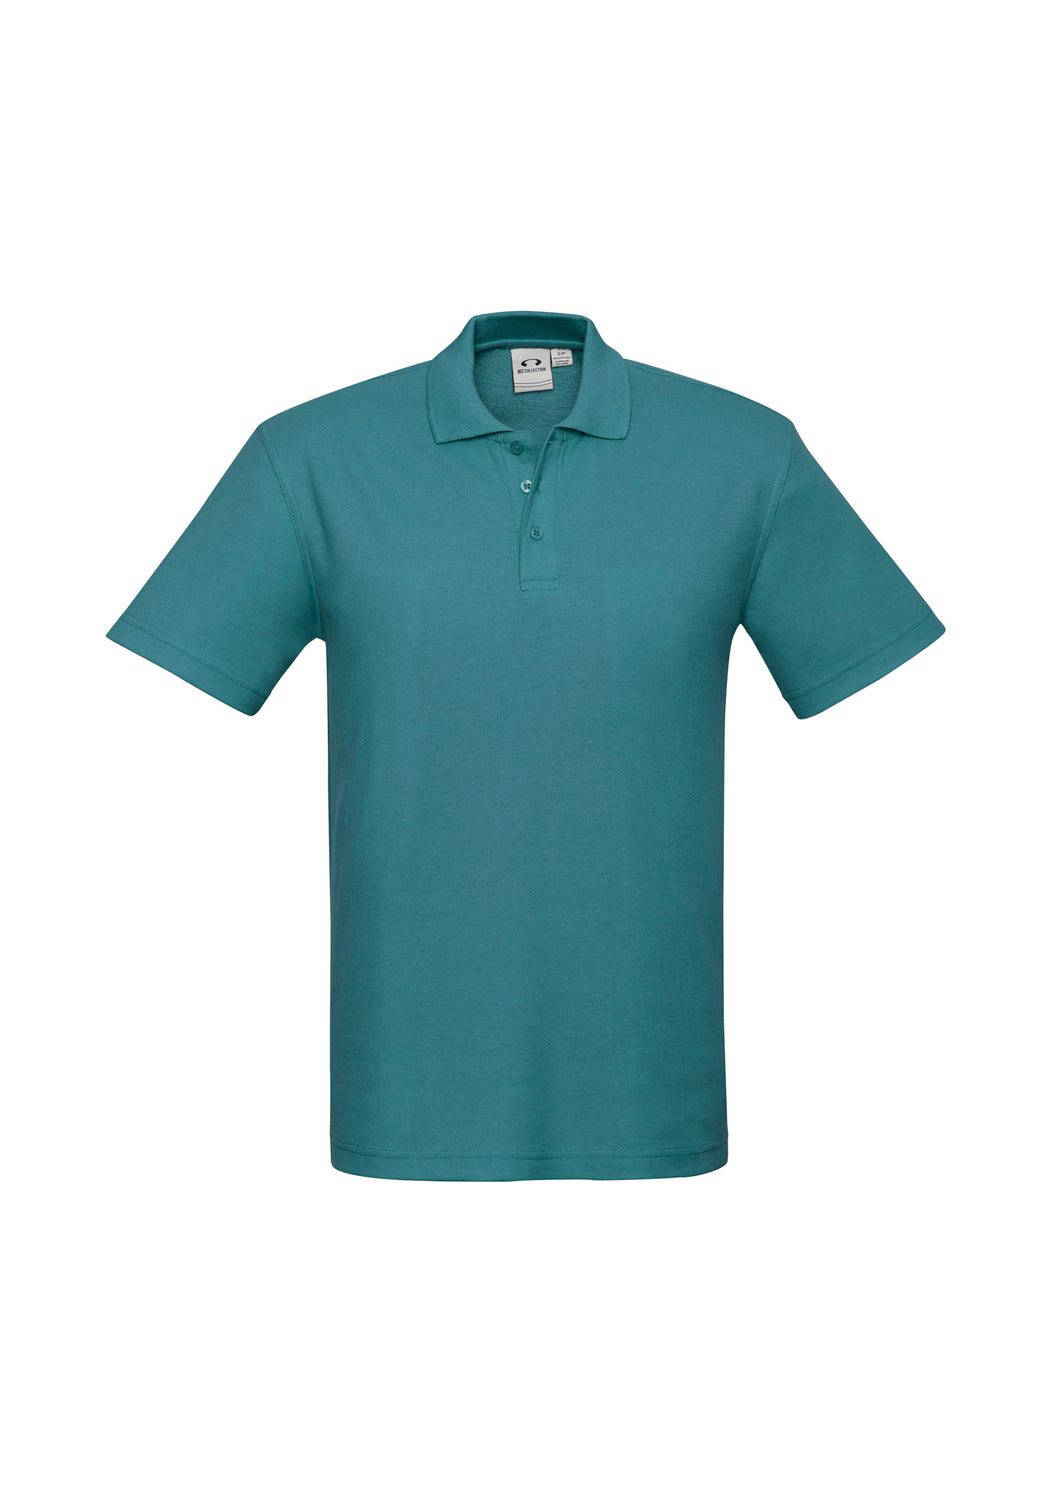 Kids Classic Pique Knit Polo - Teal